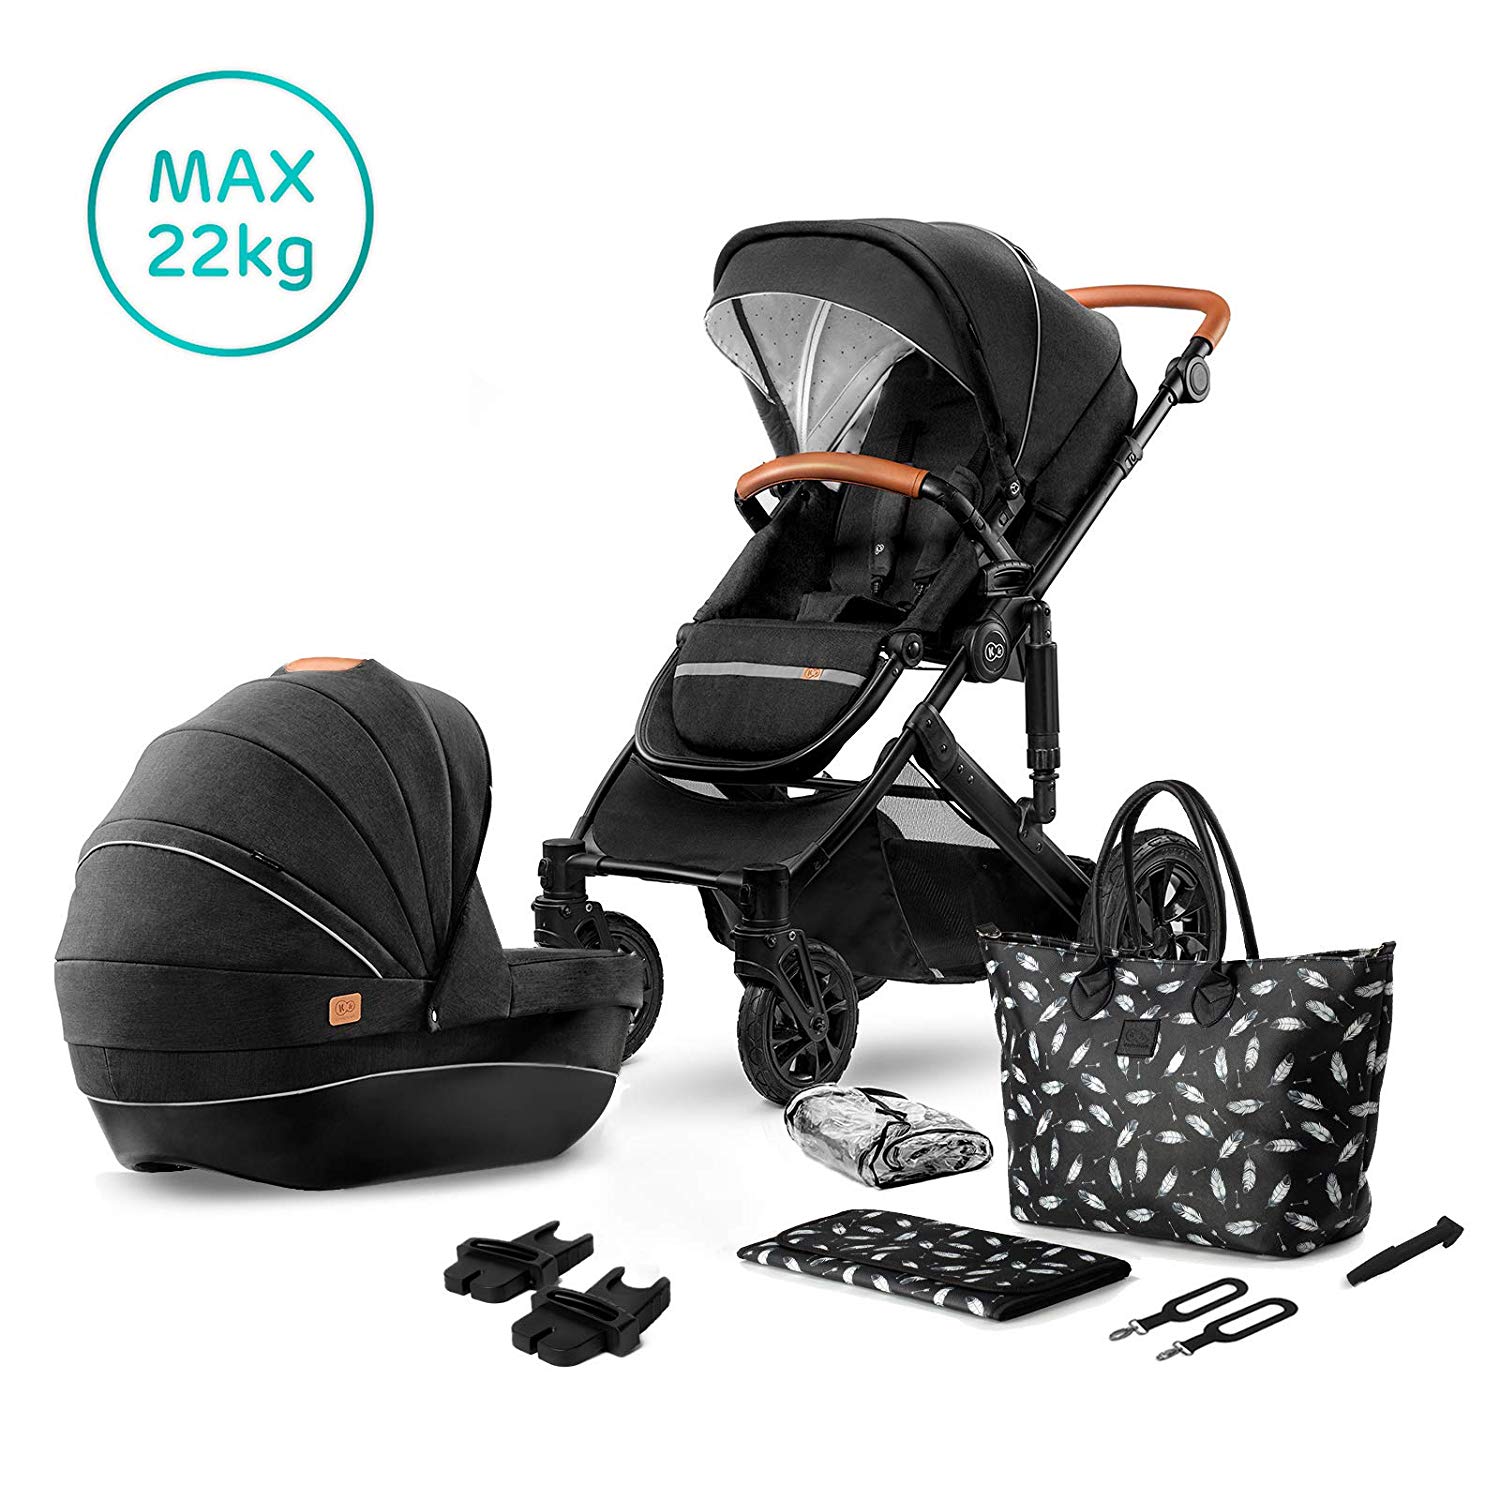 Kinderkraft Pram 2-in-1 Prime 2020 Pram Set Combination Pushchair Sports Pram Buggy and Carry Cot Large Wheels Pneumatic Tyres Comfortable Buggy Seat with Reclining Position Accessories, Black